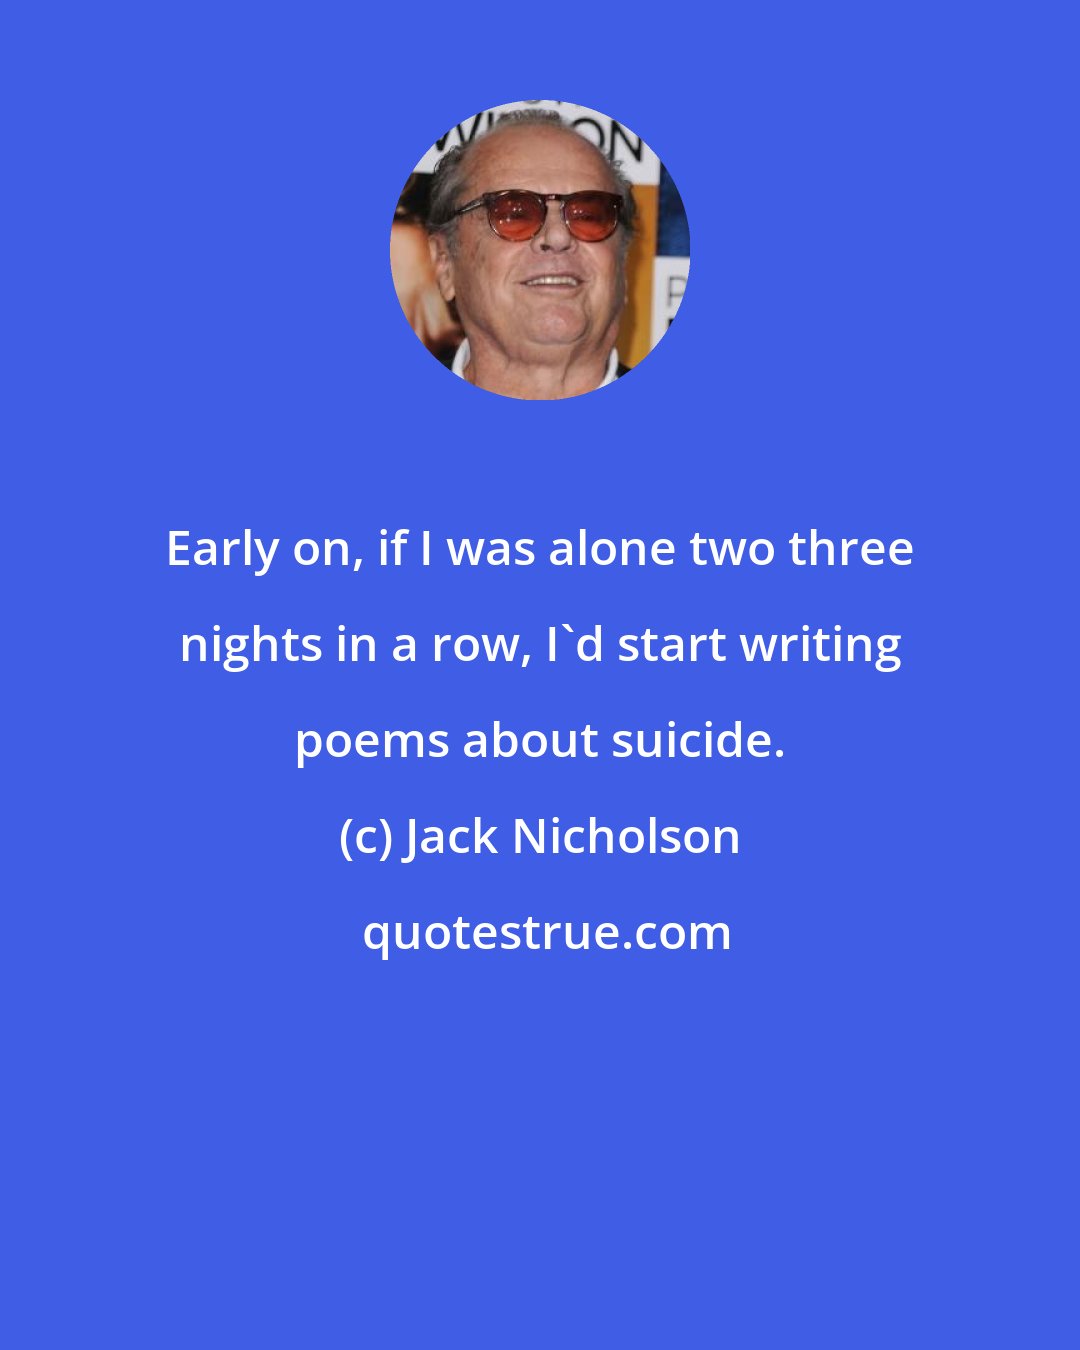 Jack Nicholson: Early on, if I was alone two three nights in a row, I'd start writing poems about suicide.